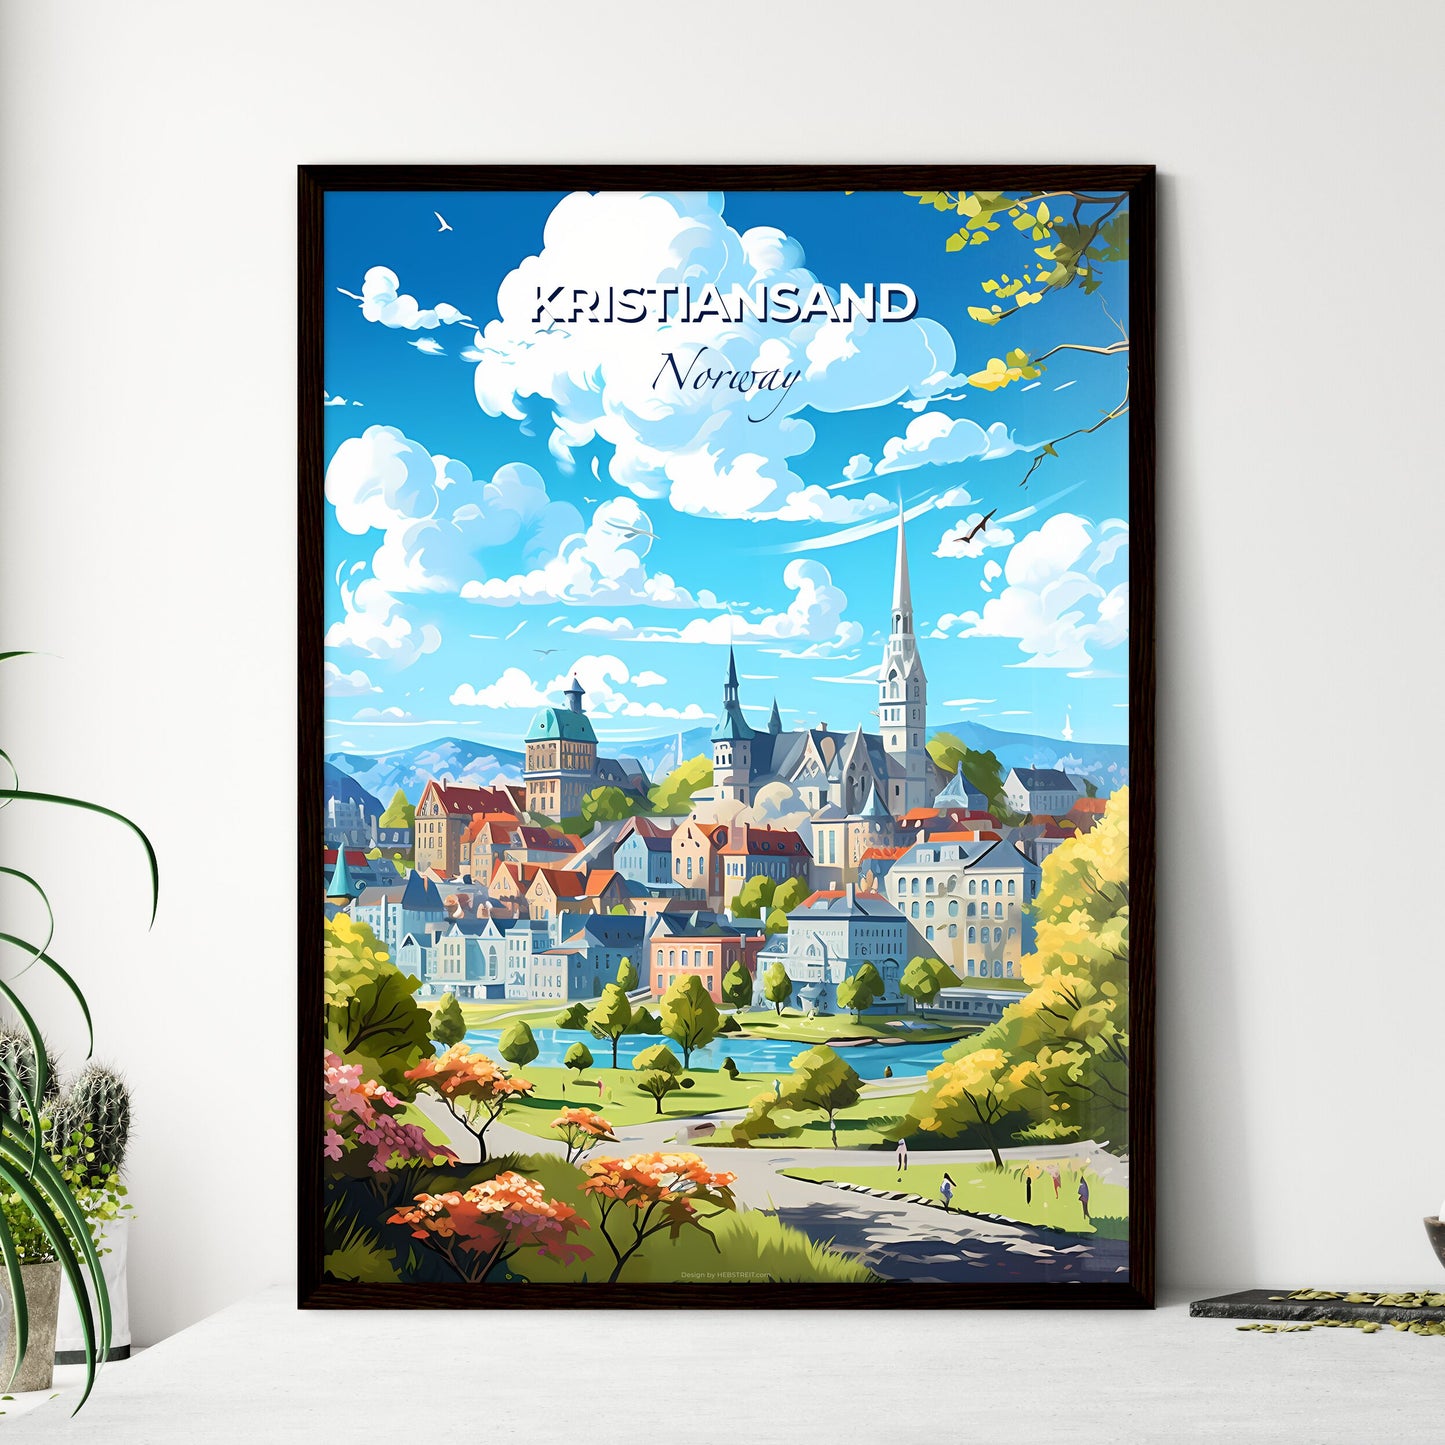 Kristiansand Norway Skyline - A City With A River And Trees - Customizable Travel Gift Default Title